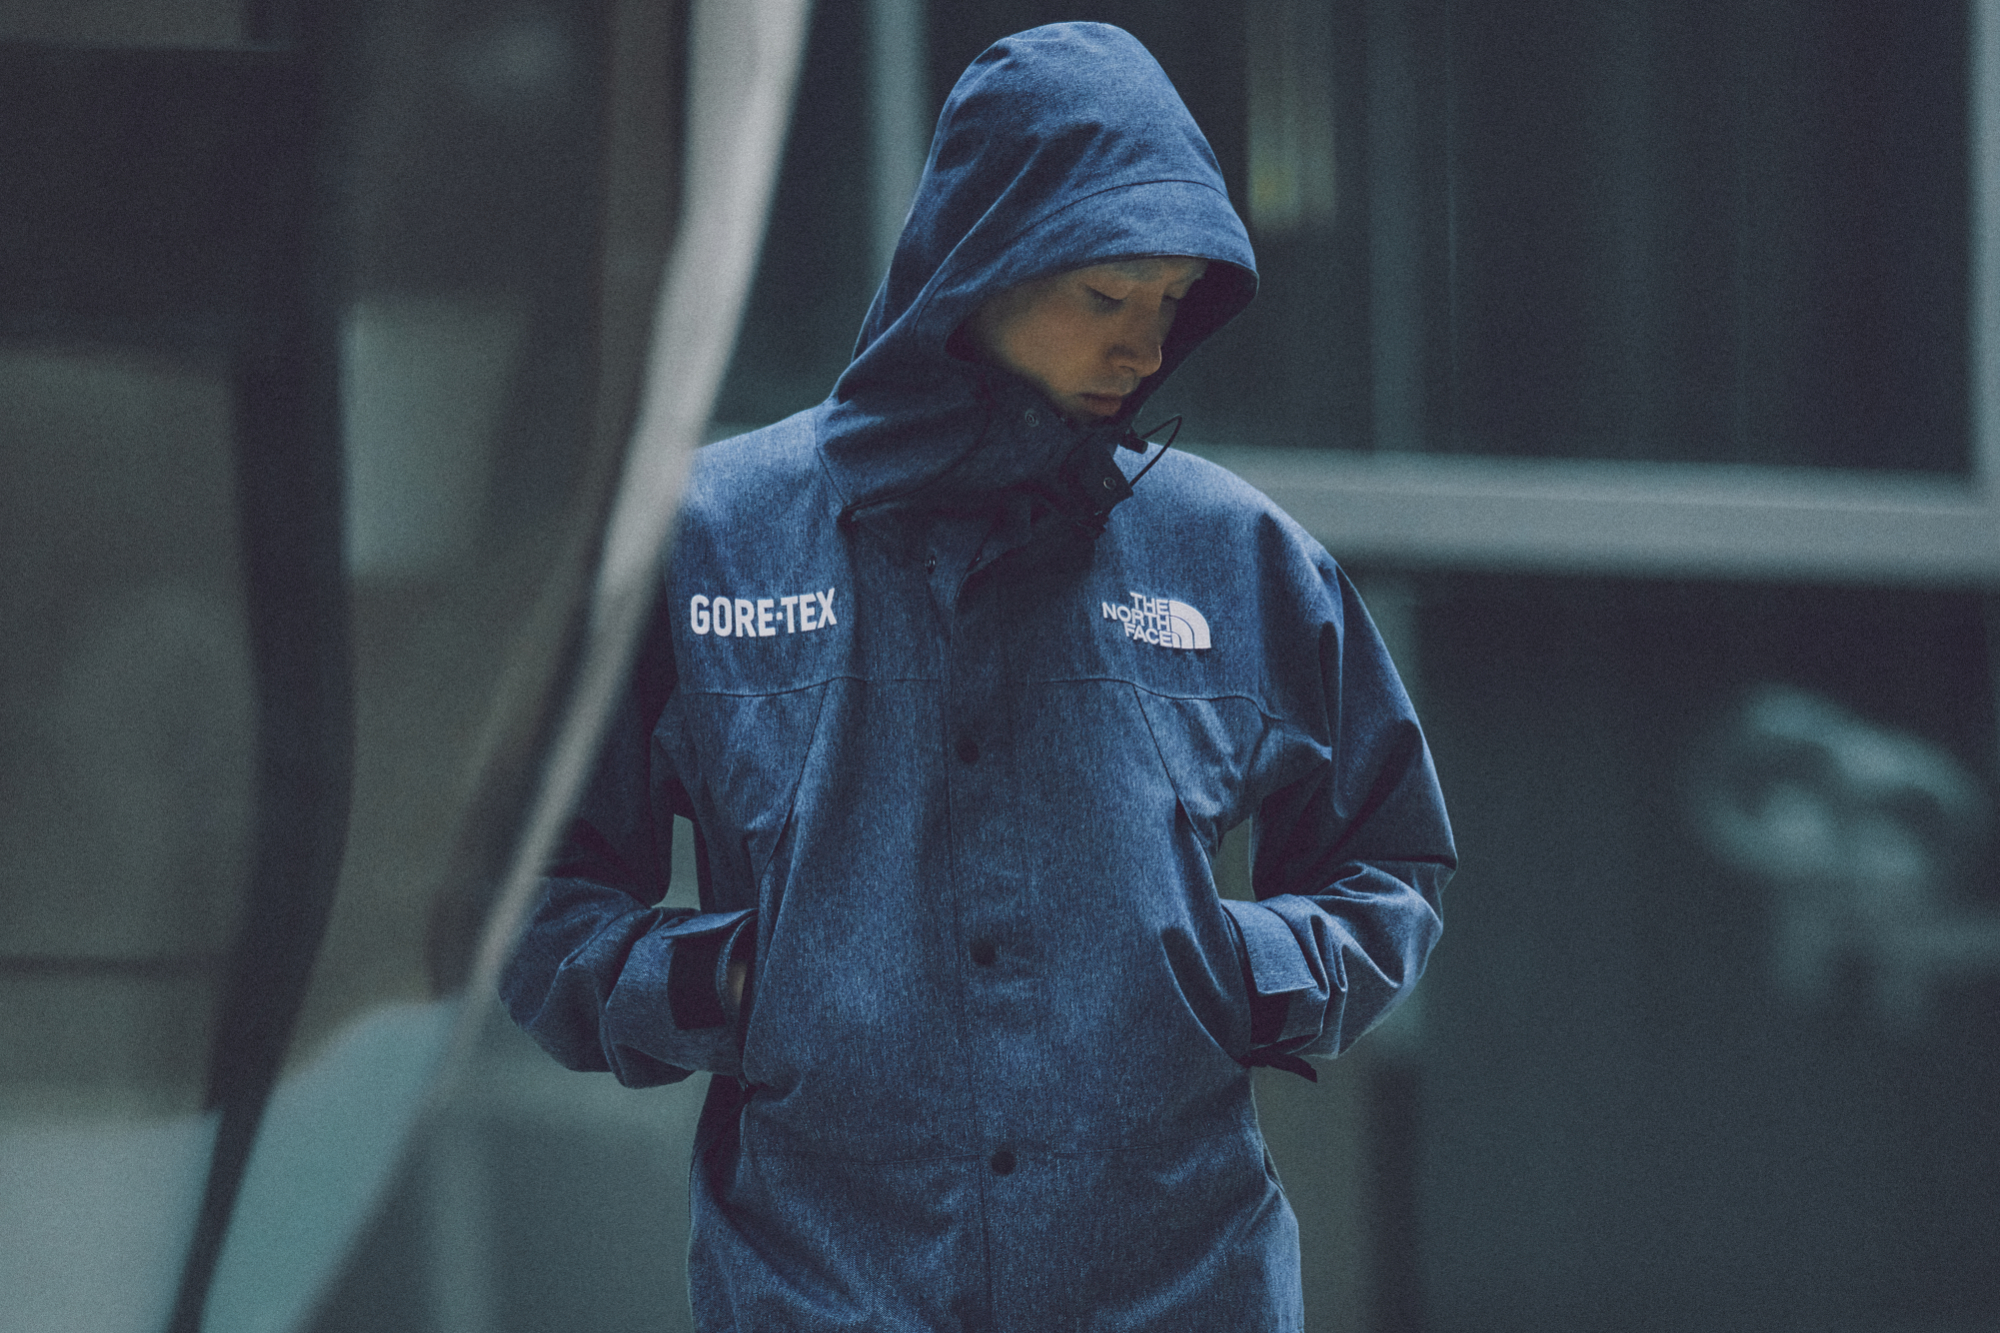 Supreme®/The North Face®. 10/13/2022 Supreme has worked with The